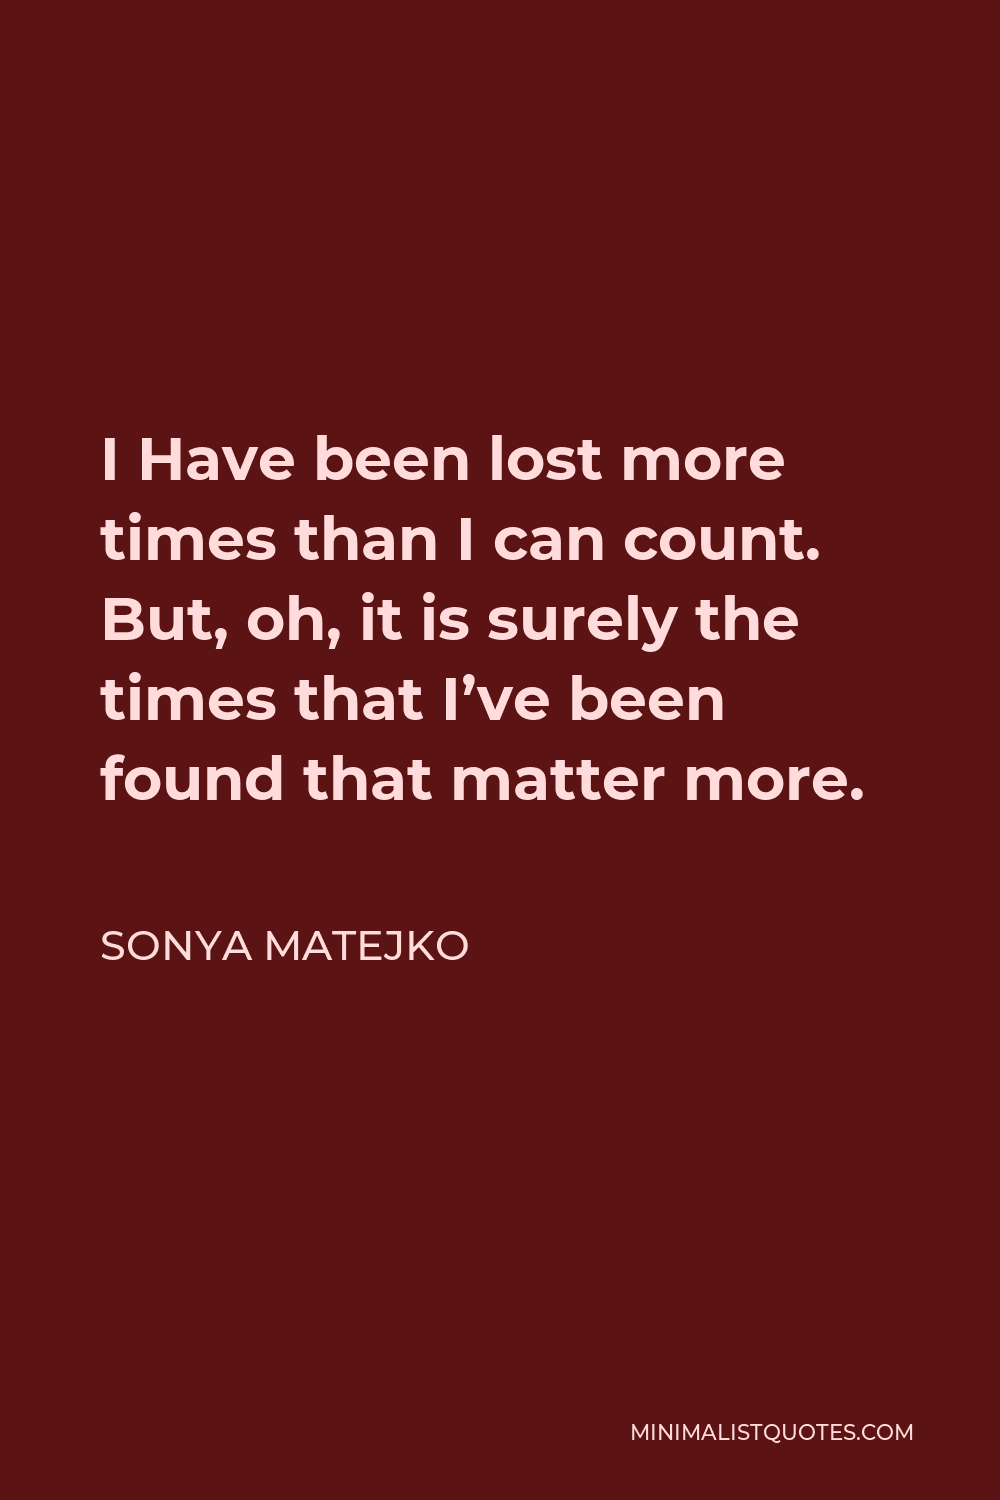 Sonya Matejko Quote - I Have been lost more times than I can count. But, oh, it is surely the times that I’ve been found that matter more.